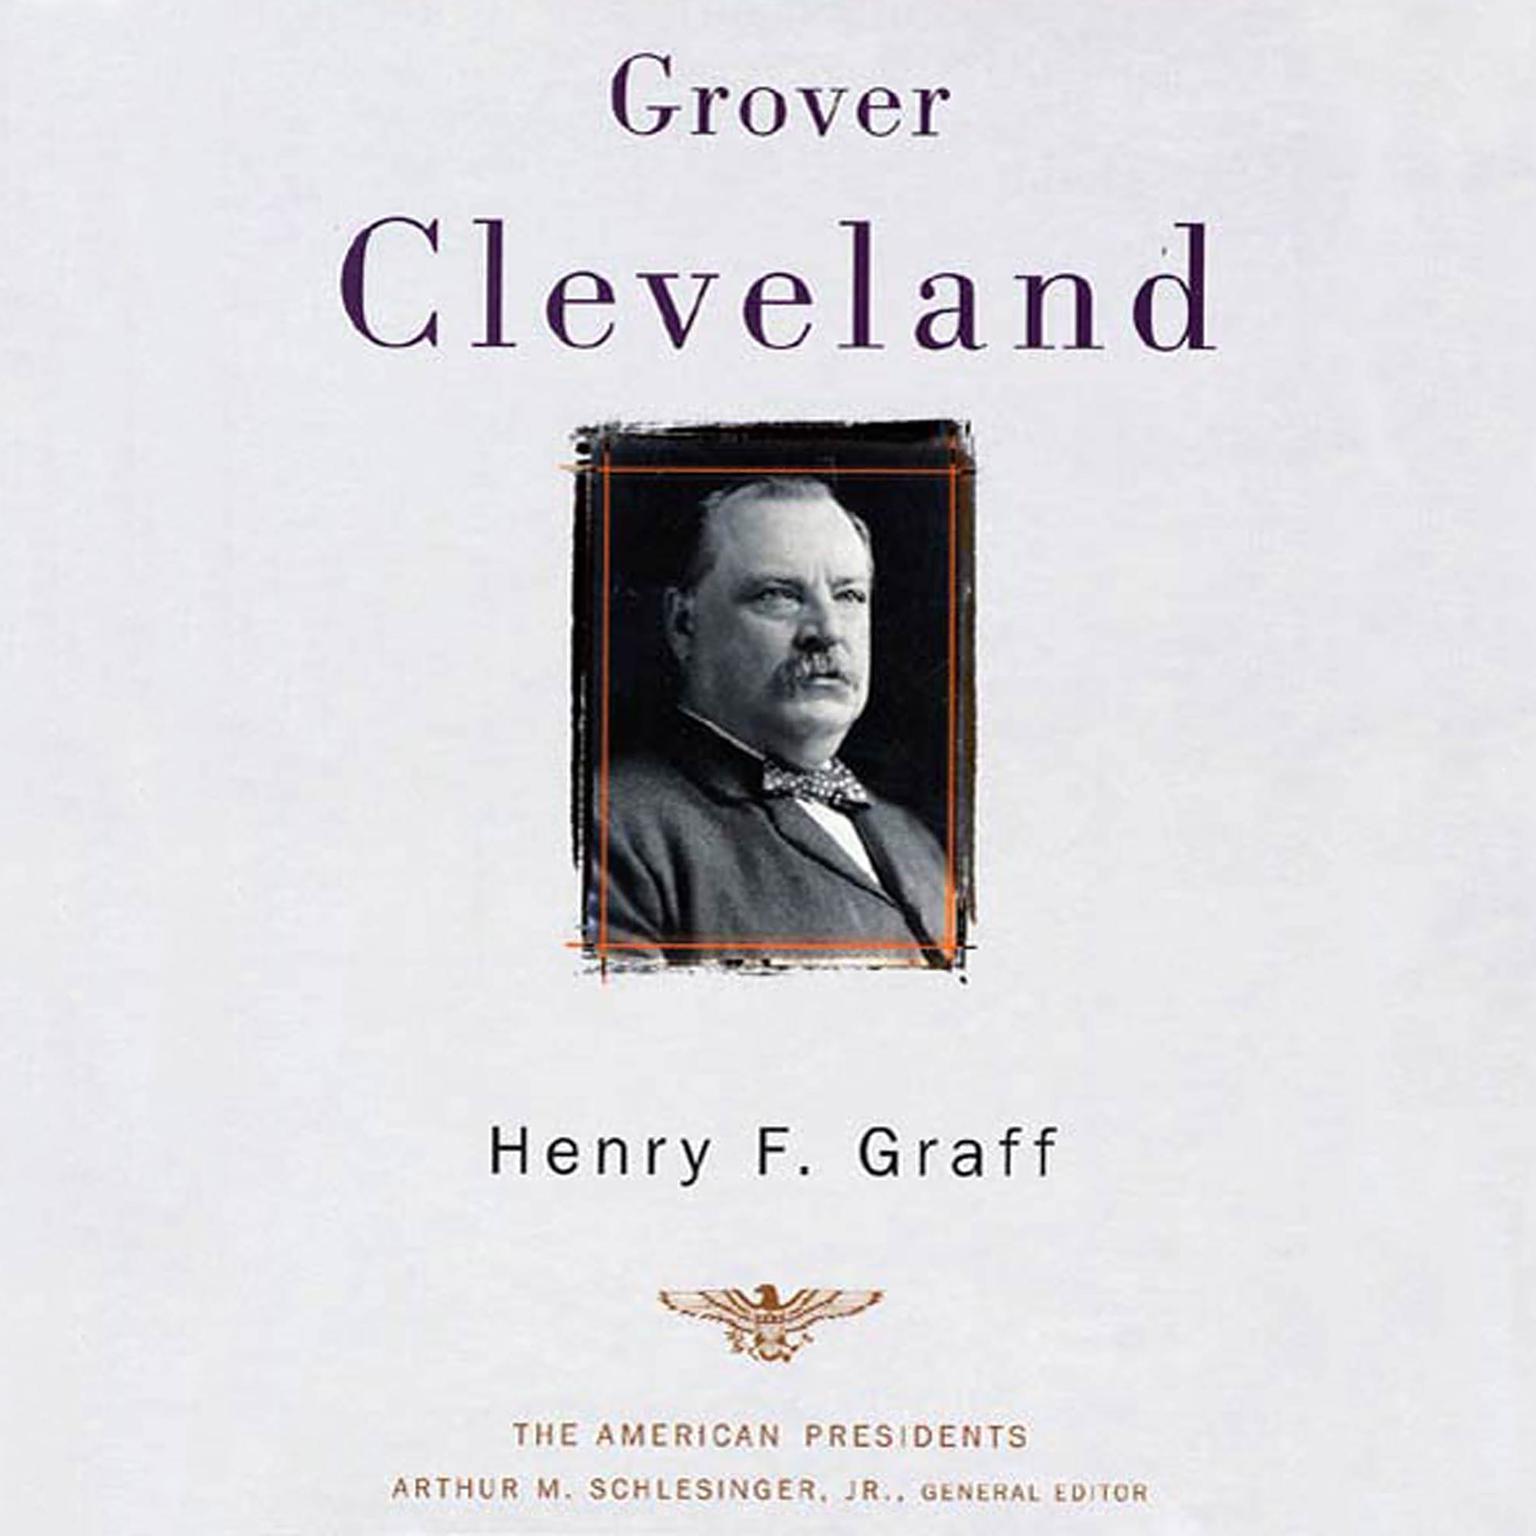 Grover Cleveland: The American Presidents Series: The 22nd and 24th President, 1885-1889 and 1893-1897 Audiobook, by Henry F. Graff